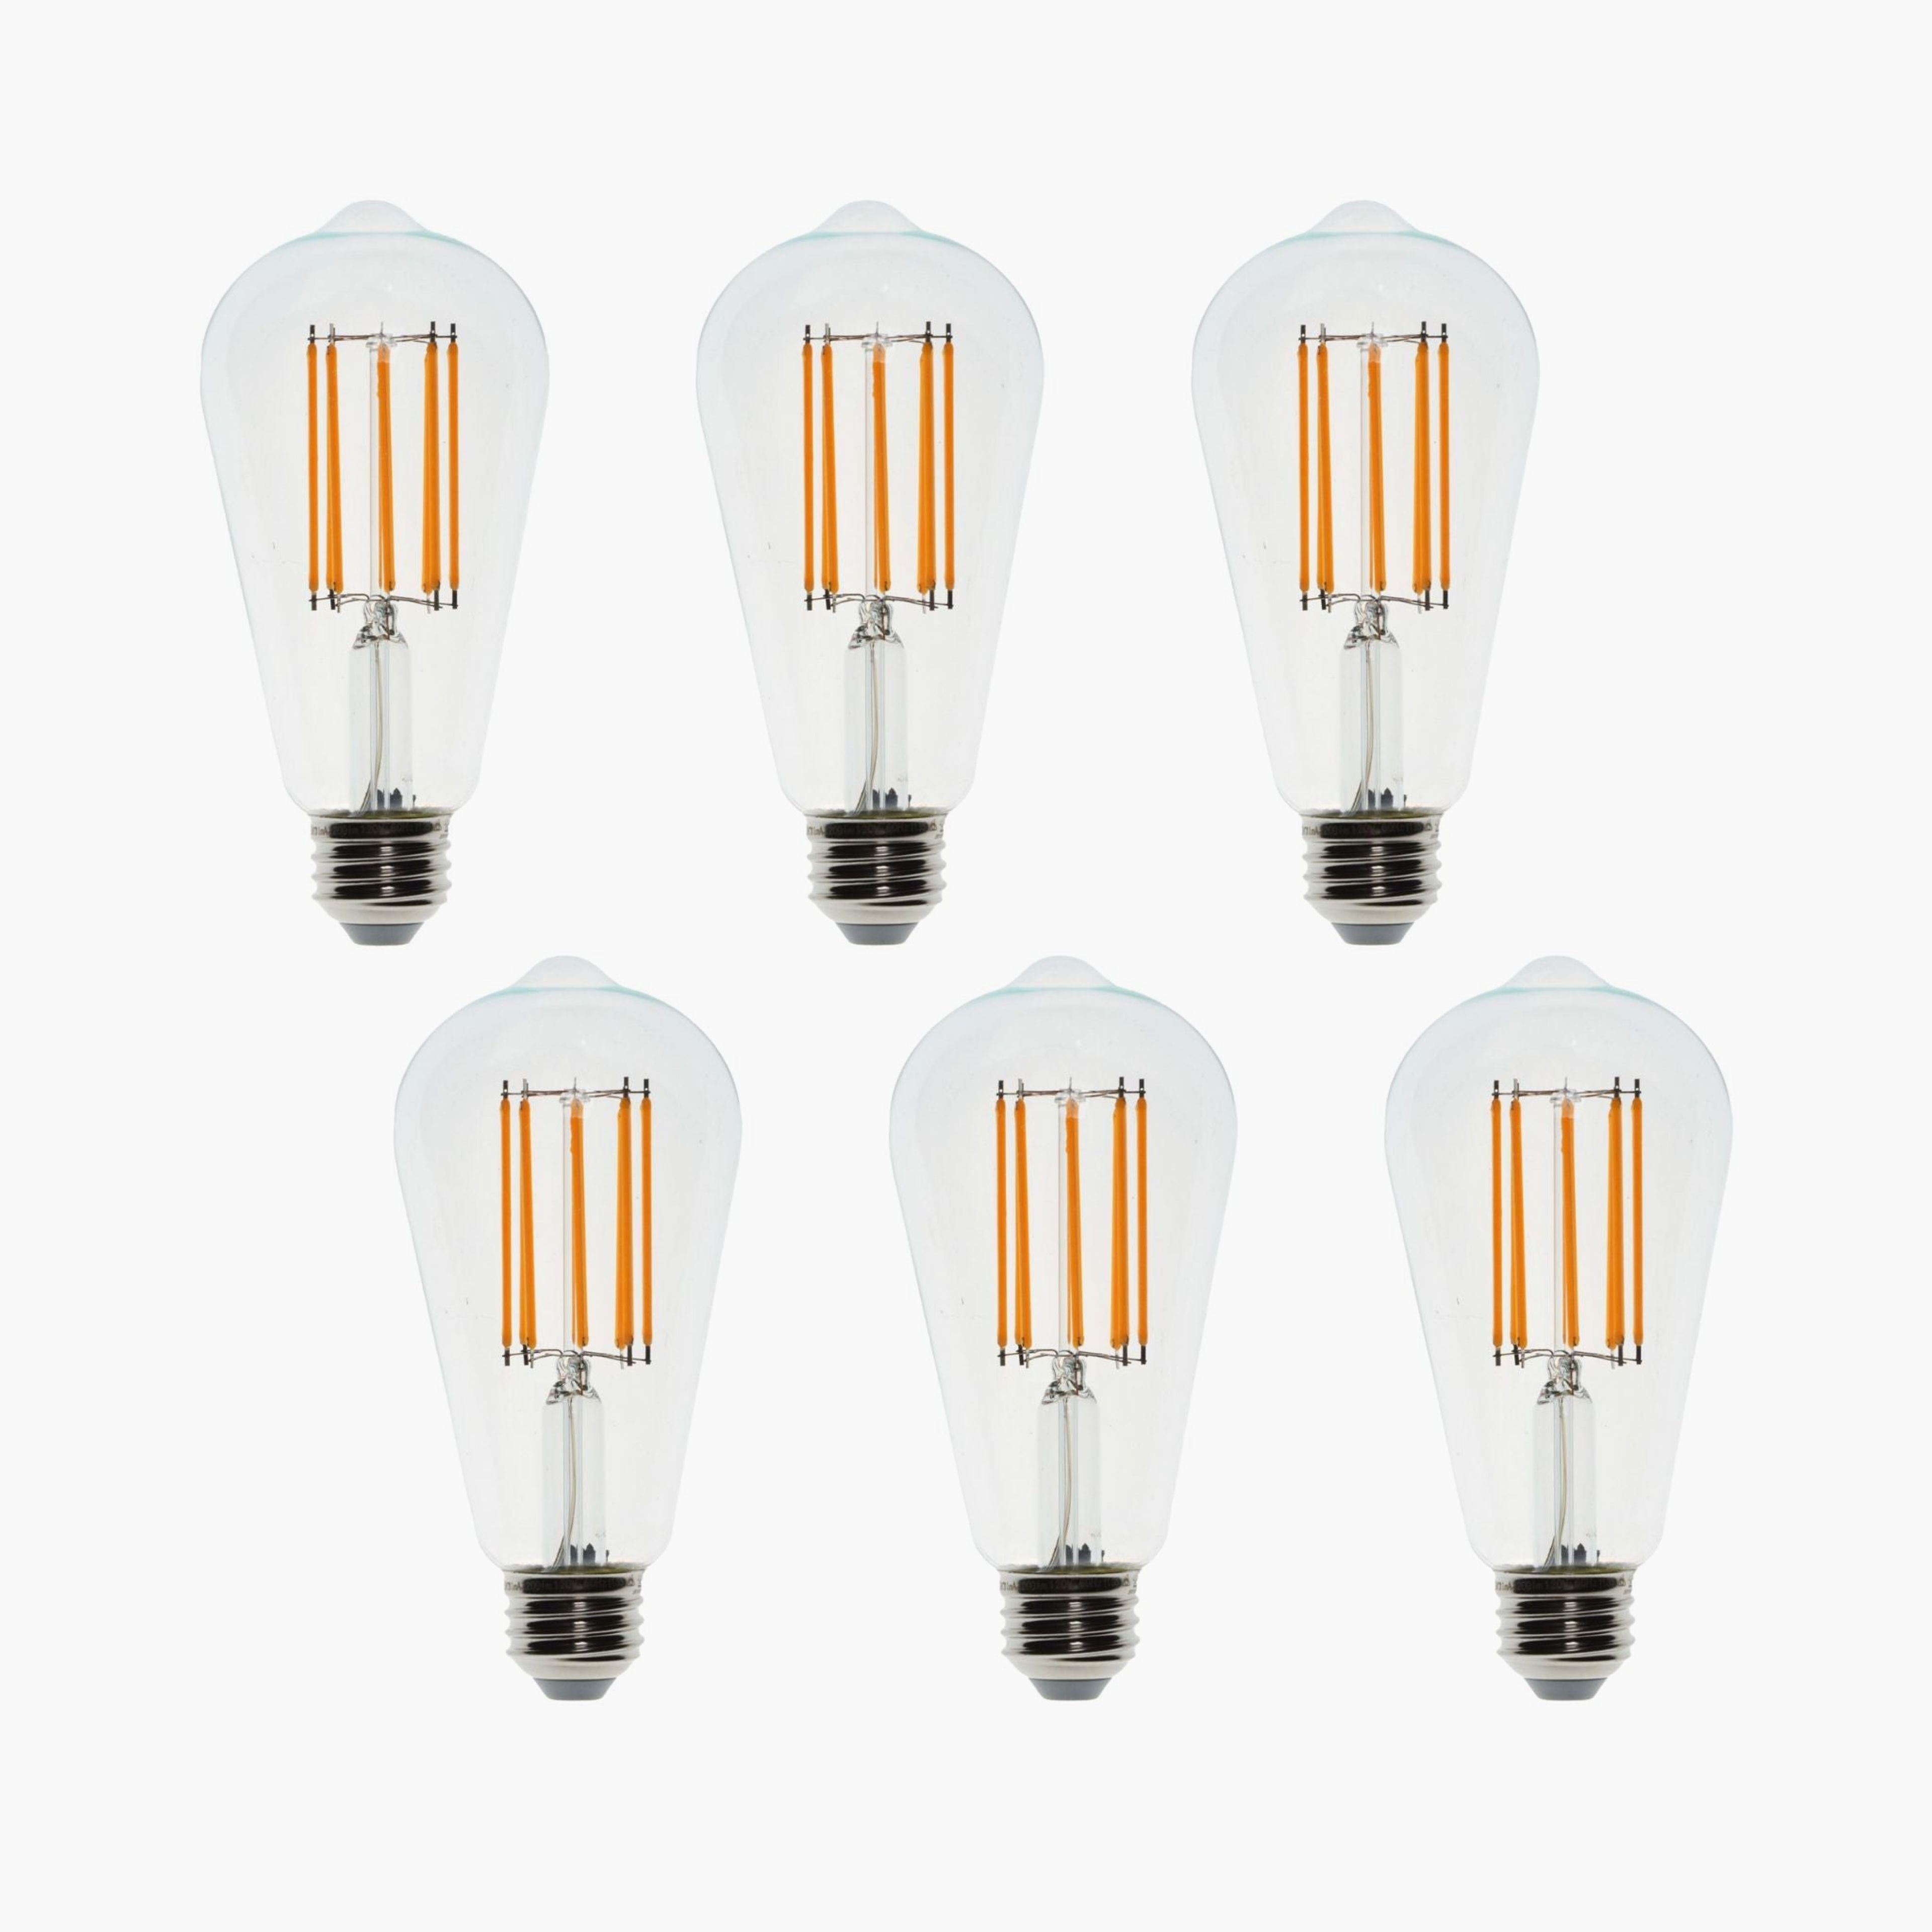 10 Watt LED Filament Bulb (2700k) - Dimmable & Energy-Efficient | Bicycle Glass Co.